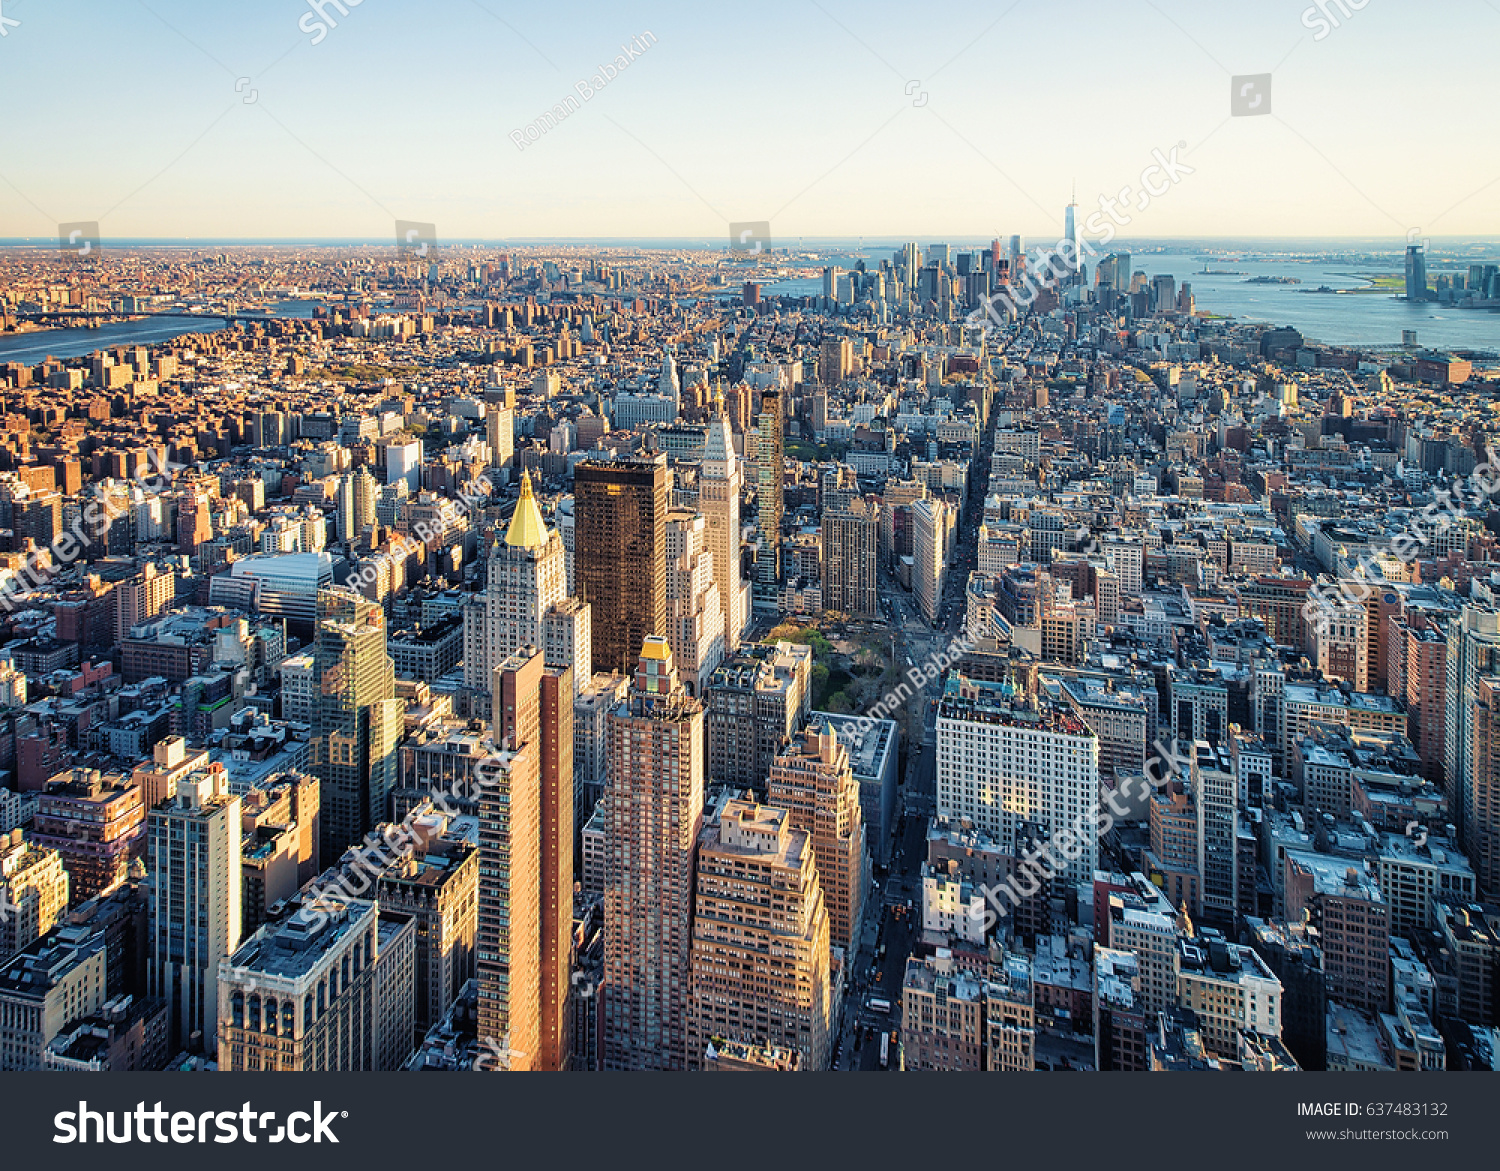 Aerial view to Skyline with Skyscrapers in Downtown Manhattan and Lower Manhattan, New York City, USA. #637483132